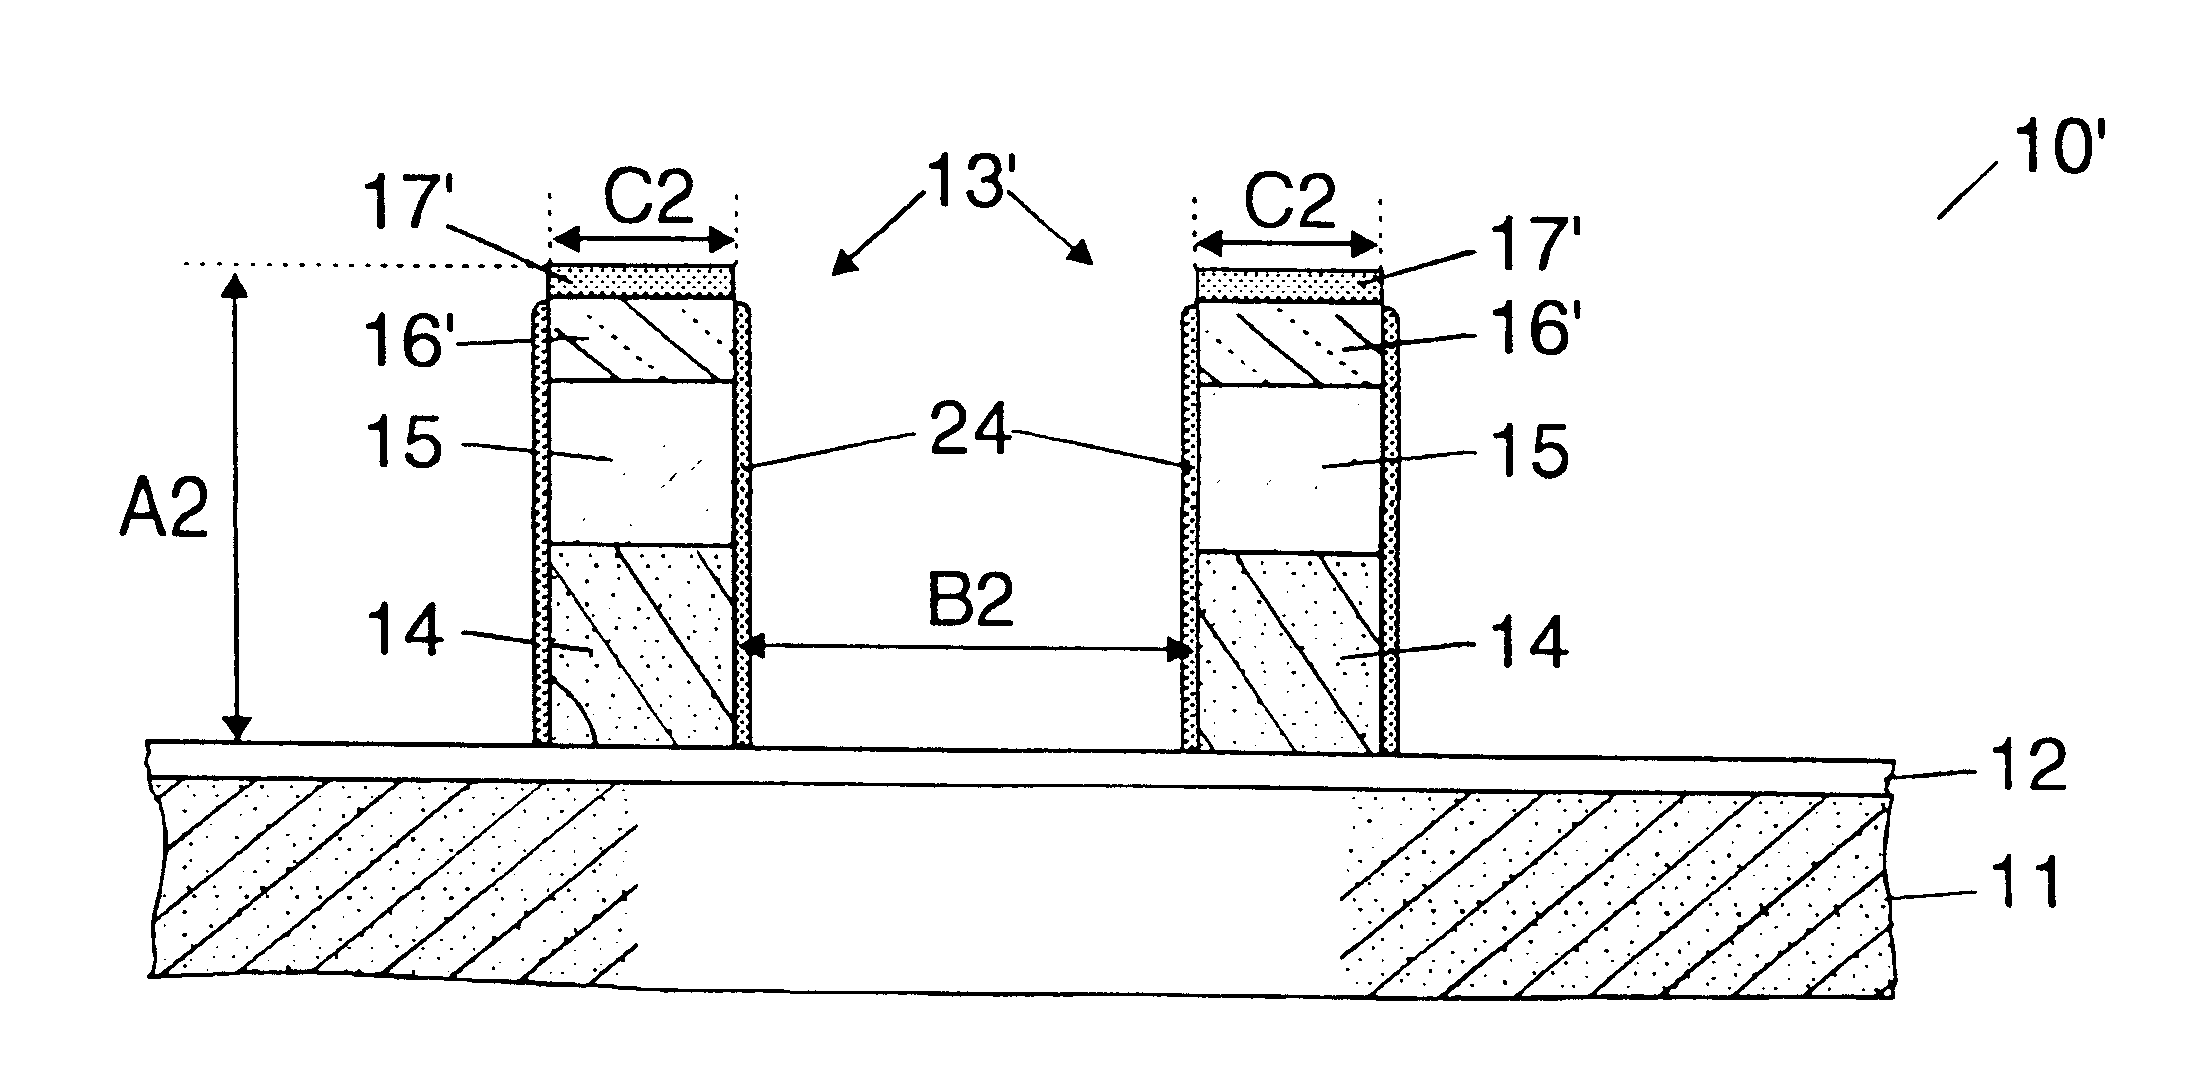 Method of fabricating a Si3N4/polycide structure using a dielectric sacrificial layer as a mask